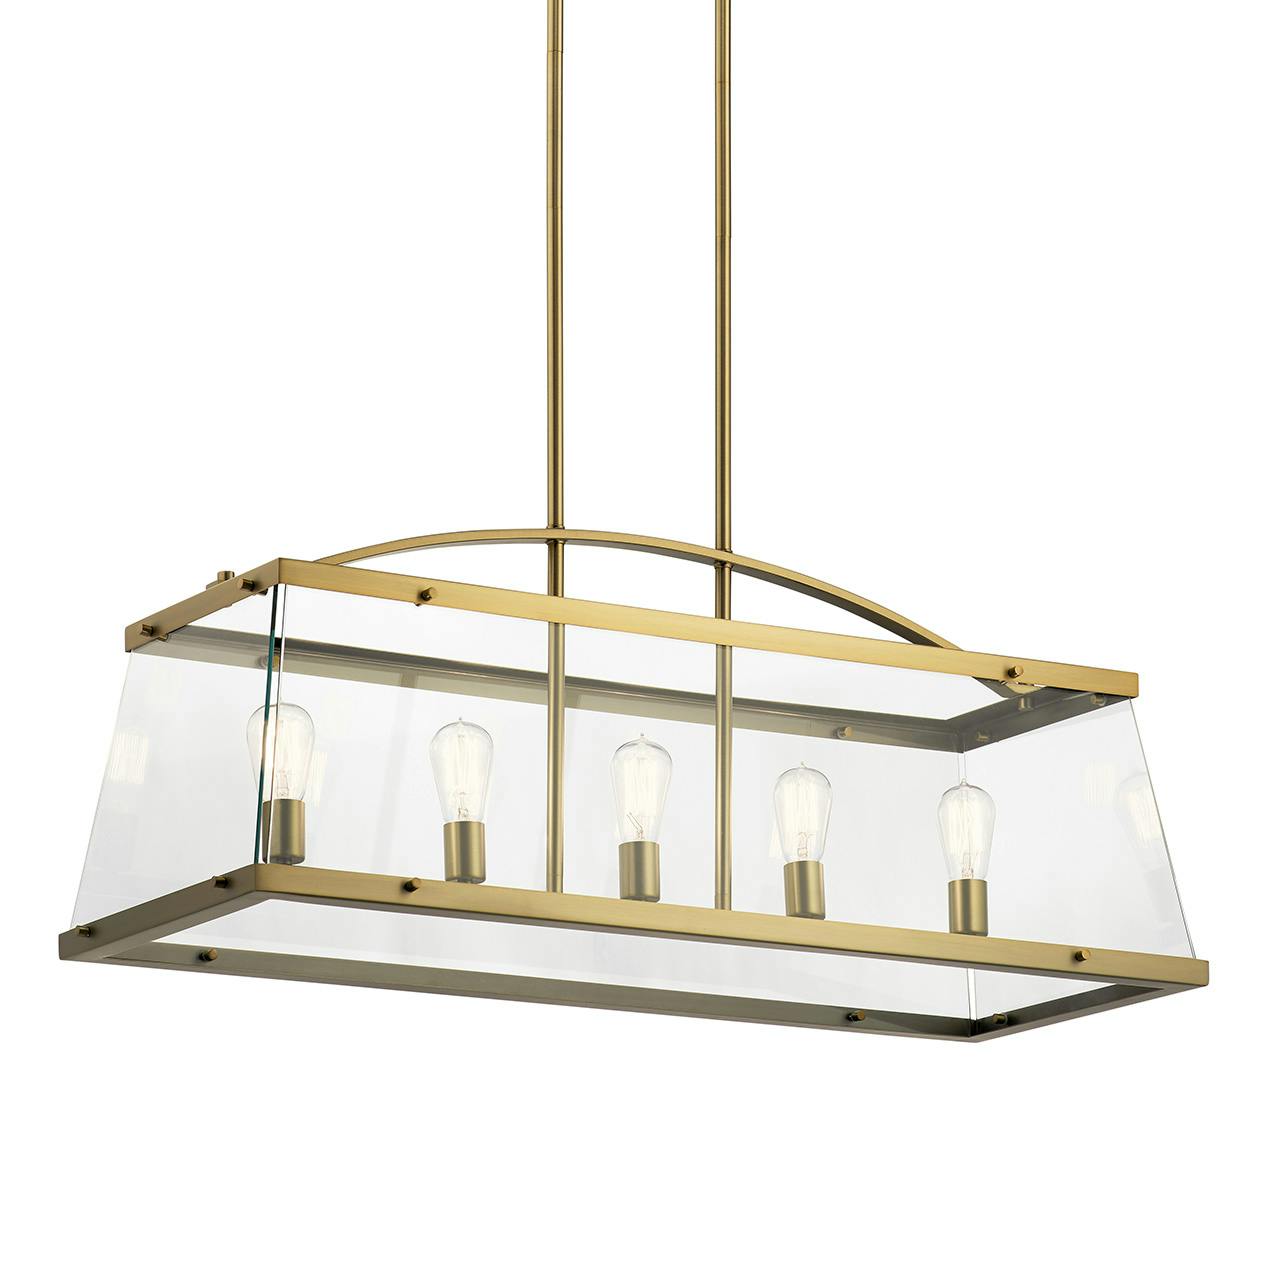 Darton™ 40.75" Linear Chandelier Brass without the canopy on a white background